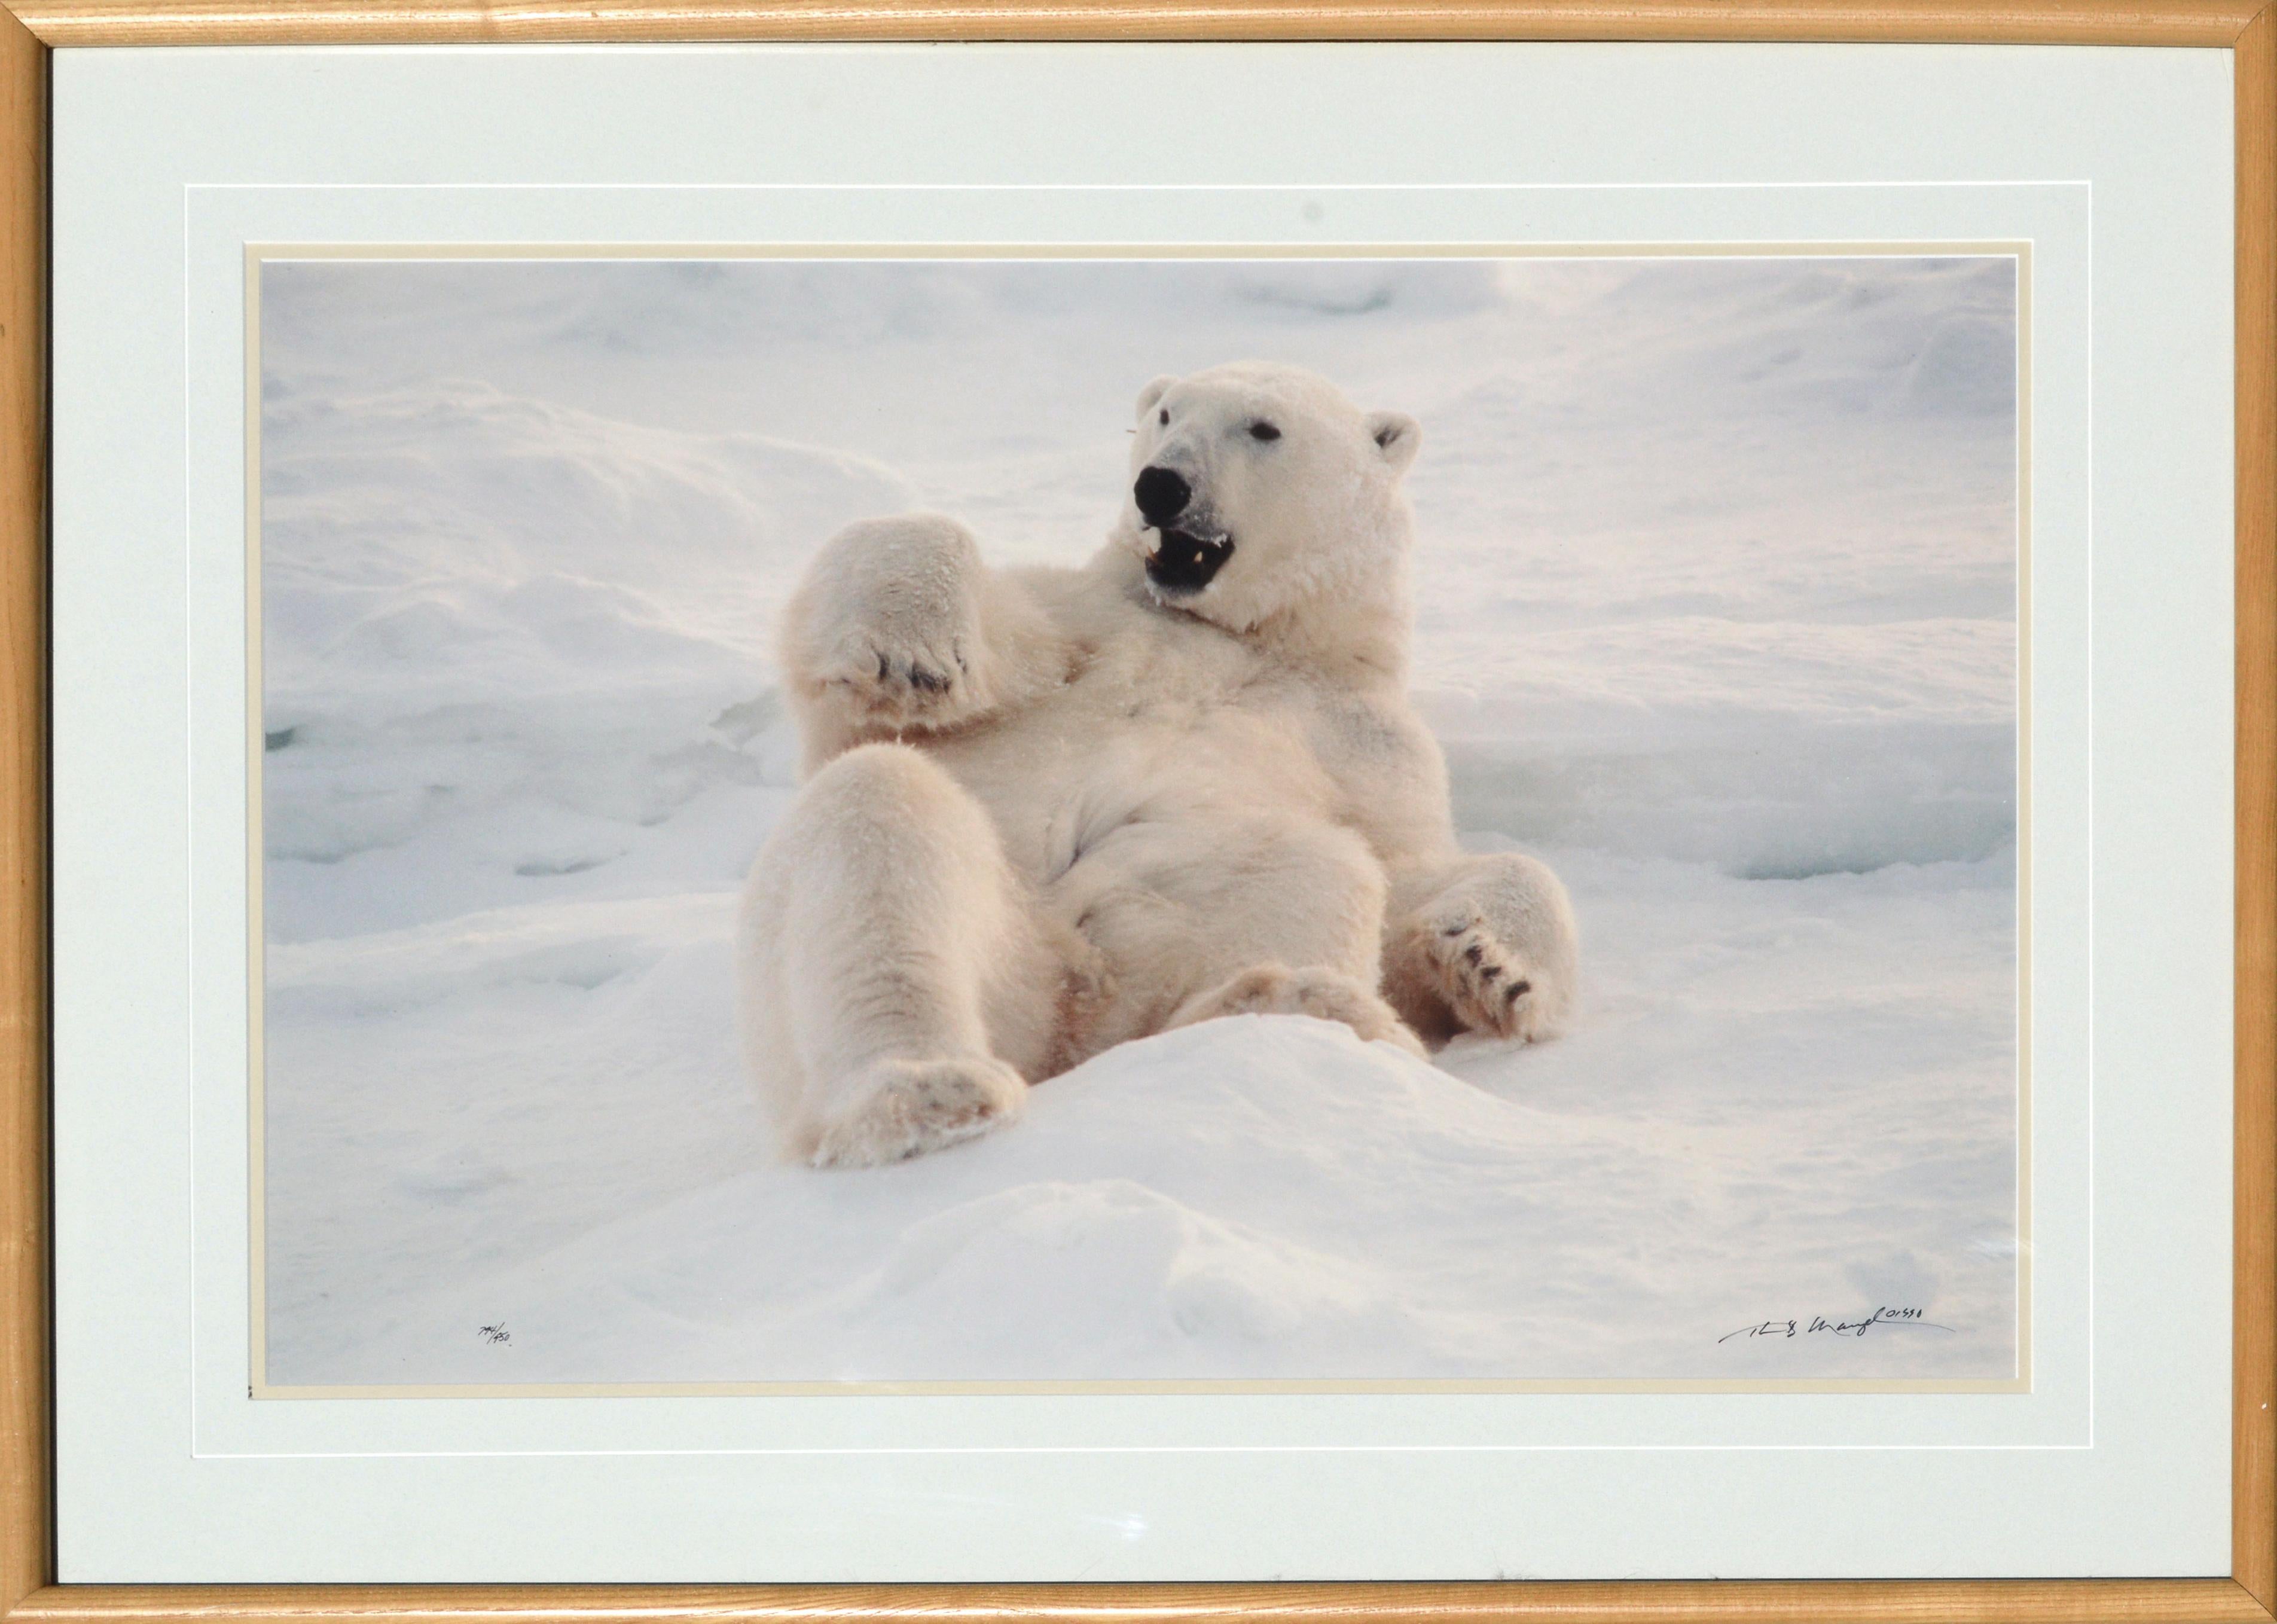 Thomas Mangelsen Color Photograph - "Feels Good" Polar Bear Photograph - Signed and Numbered Limited Edition 